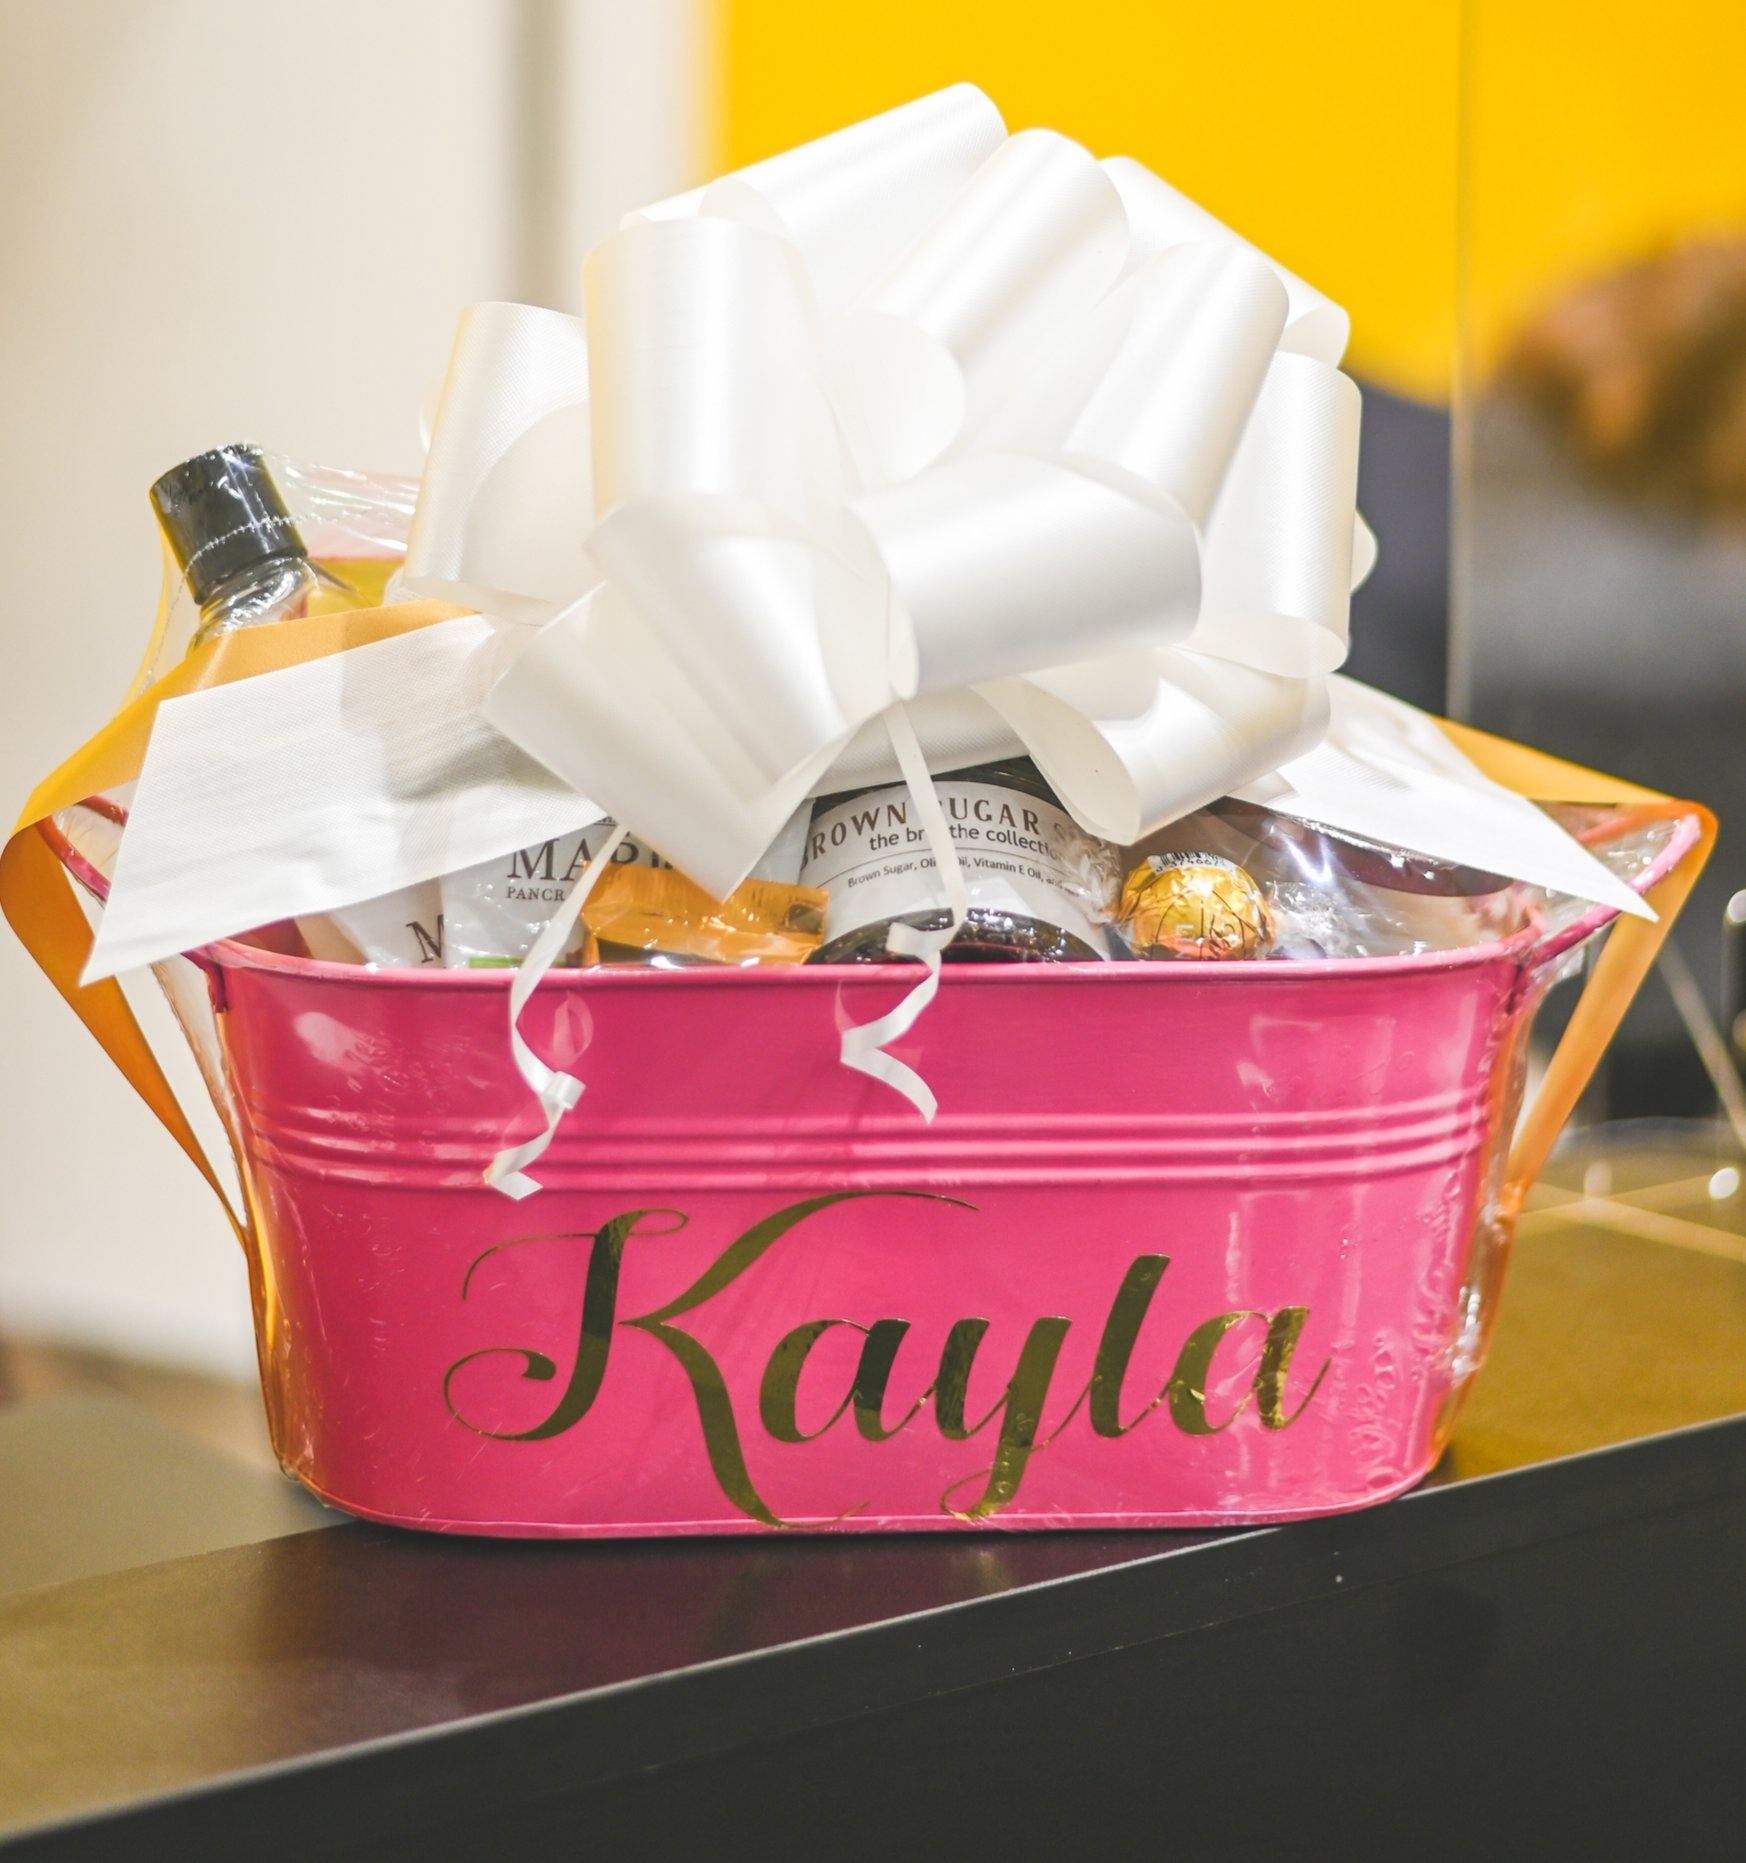 MEDIUM - 3 Featured Gifts & 3 Filler Gifts - Build Your Baskets